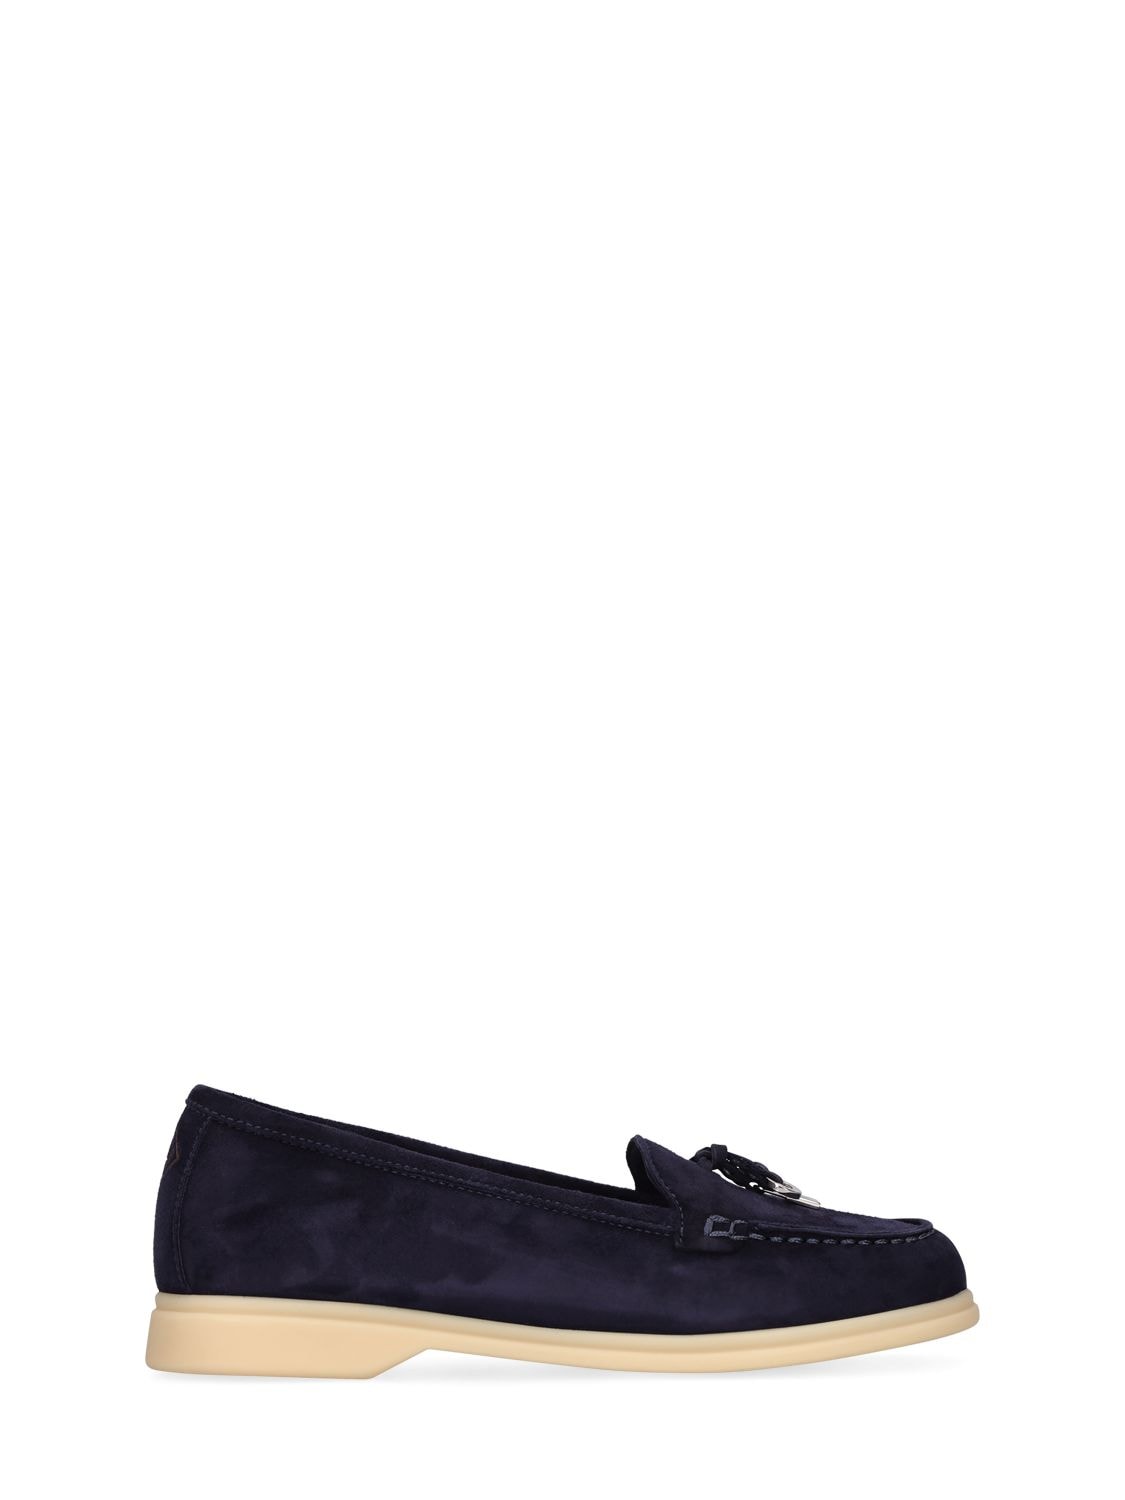 Image of Suede Loafers W/ Charms